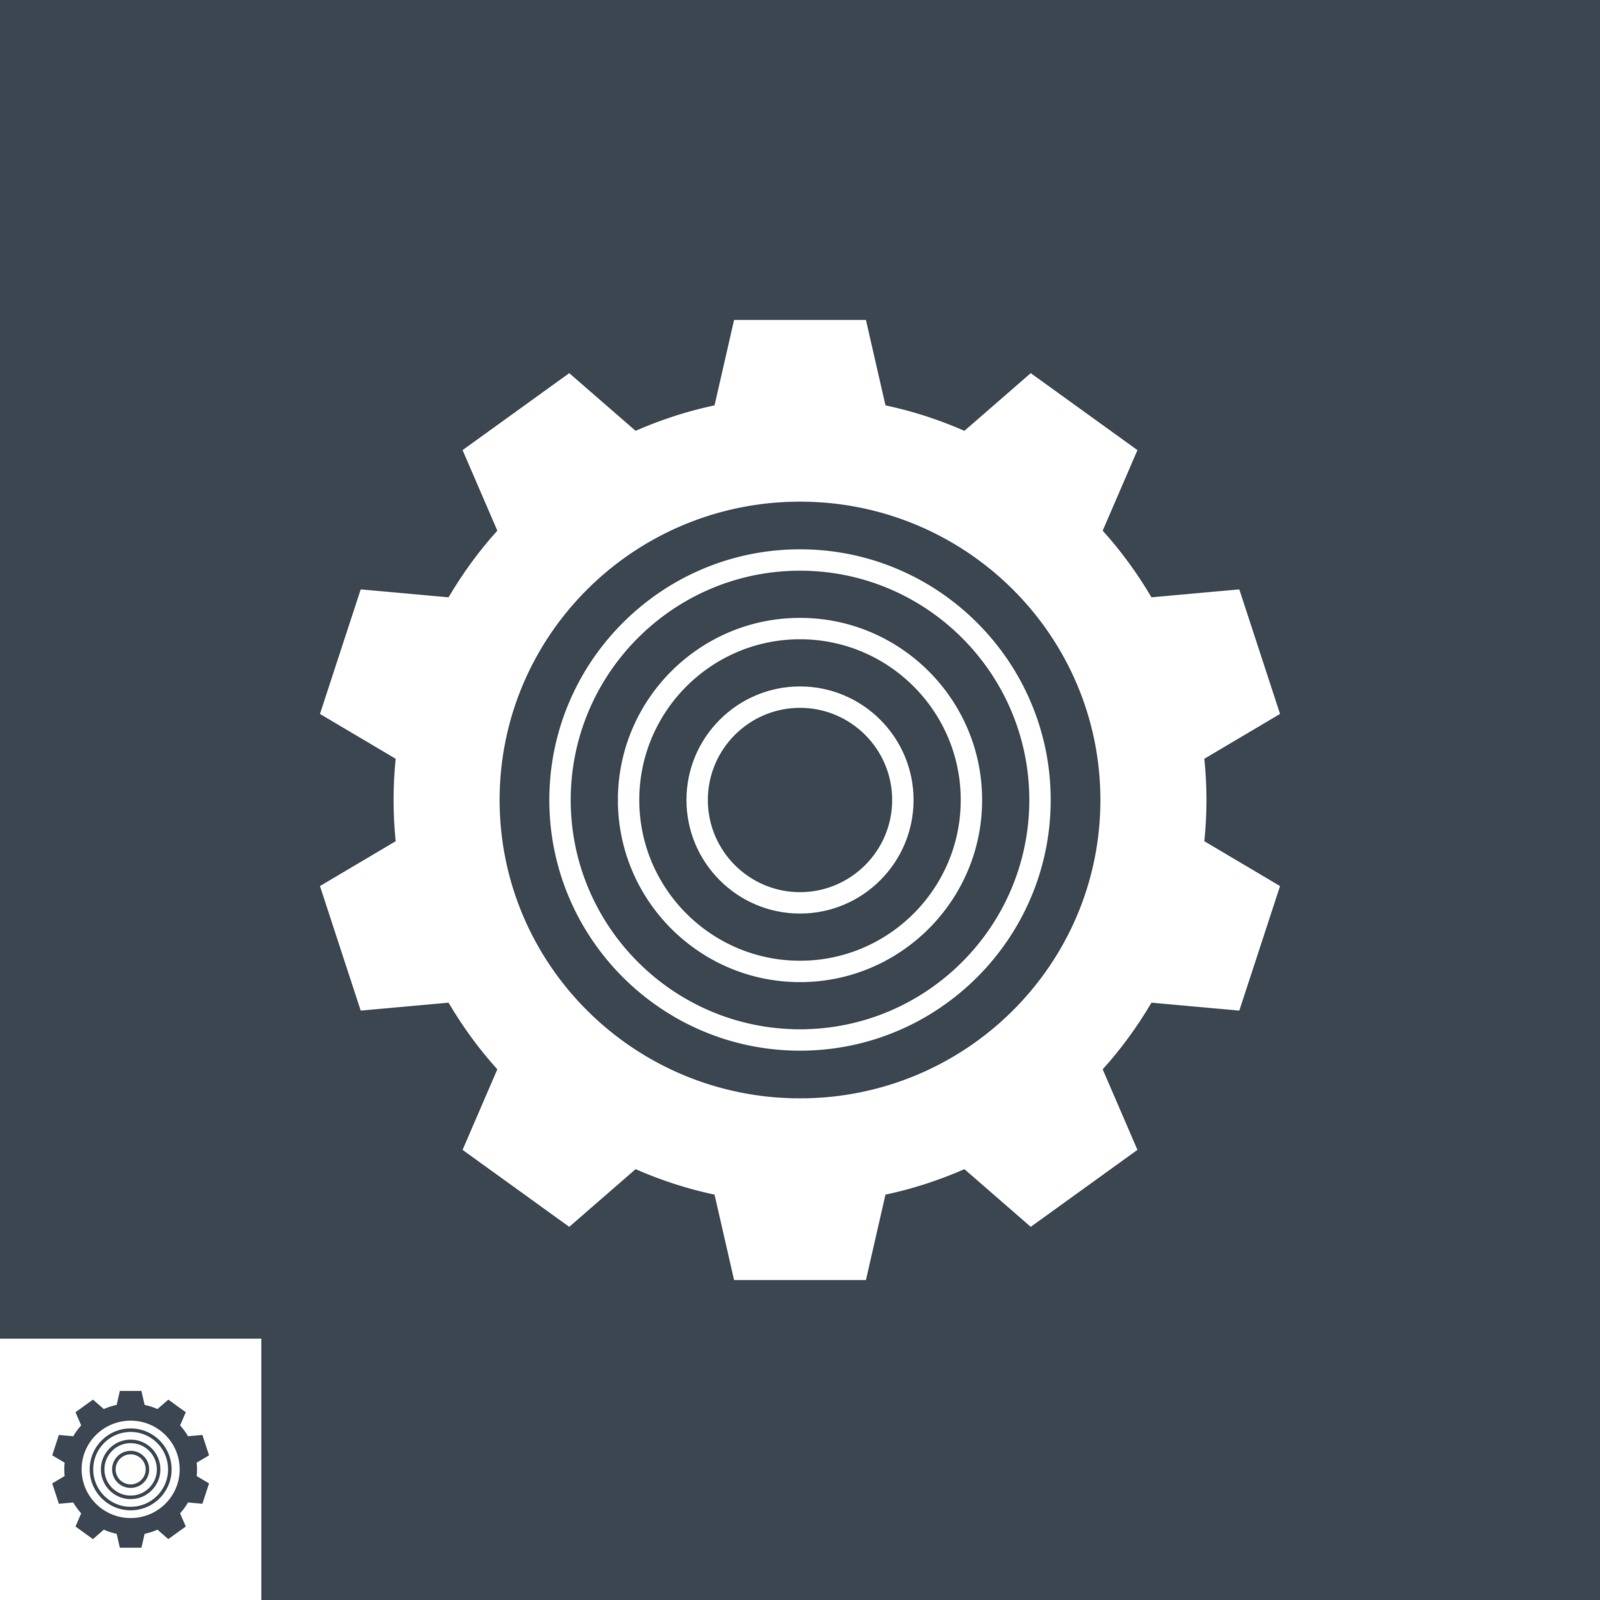 Gear Related Vector Glyph Icon. Isolated on Black Background. Vector Illustration.